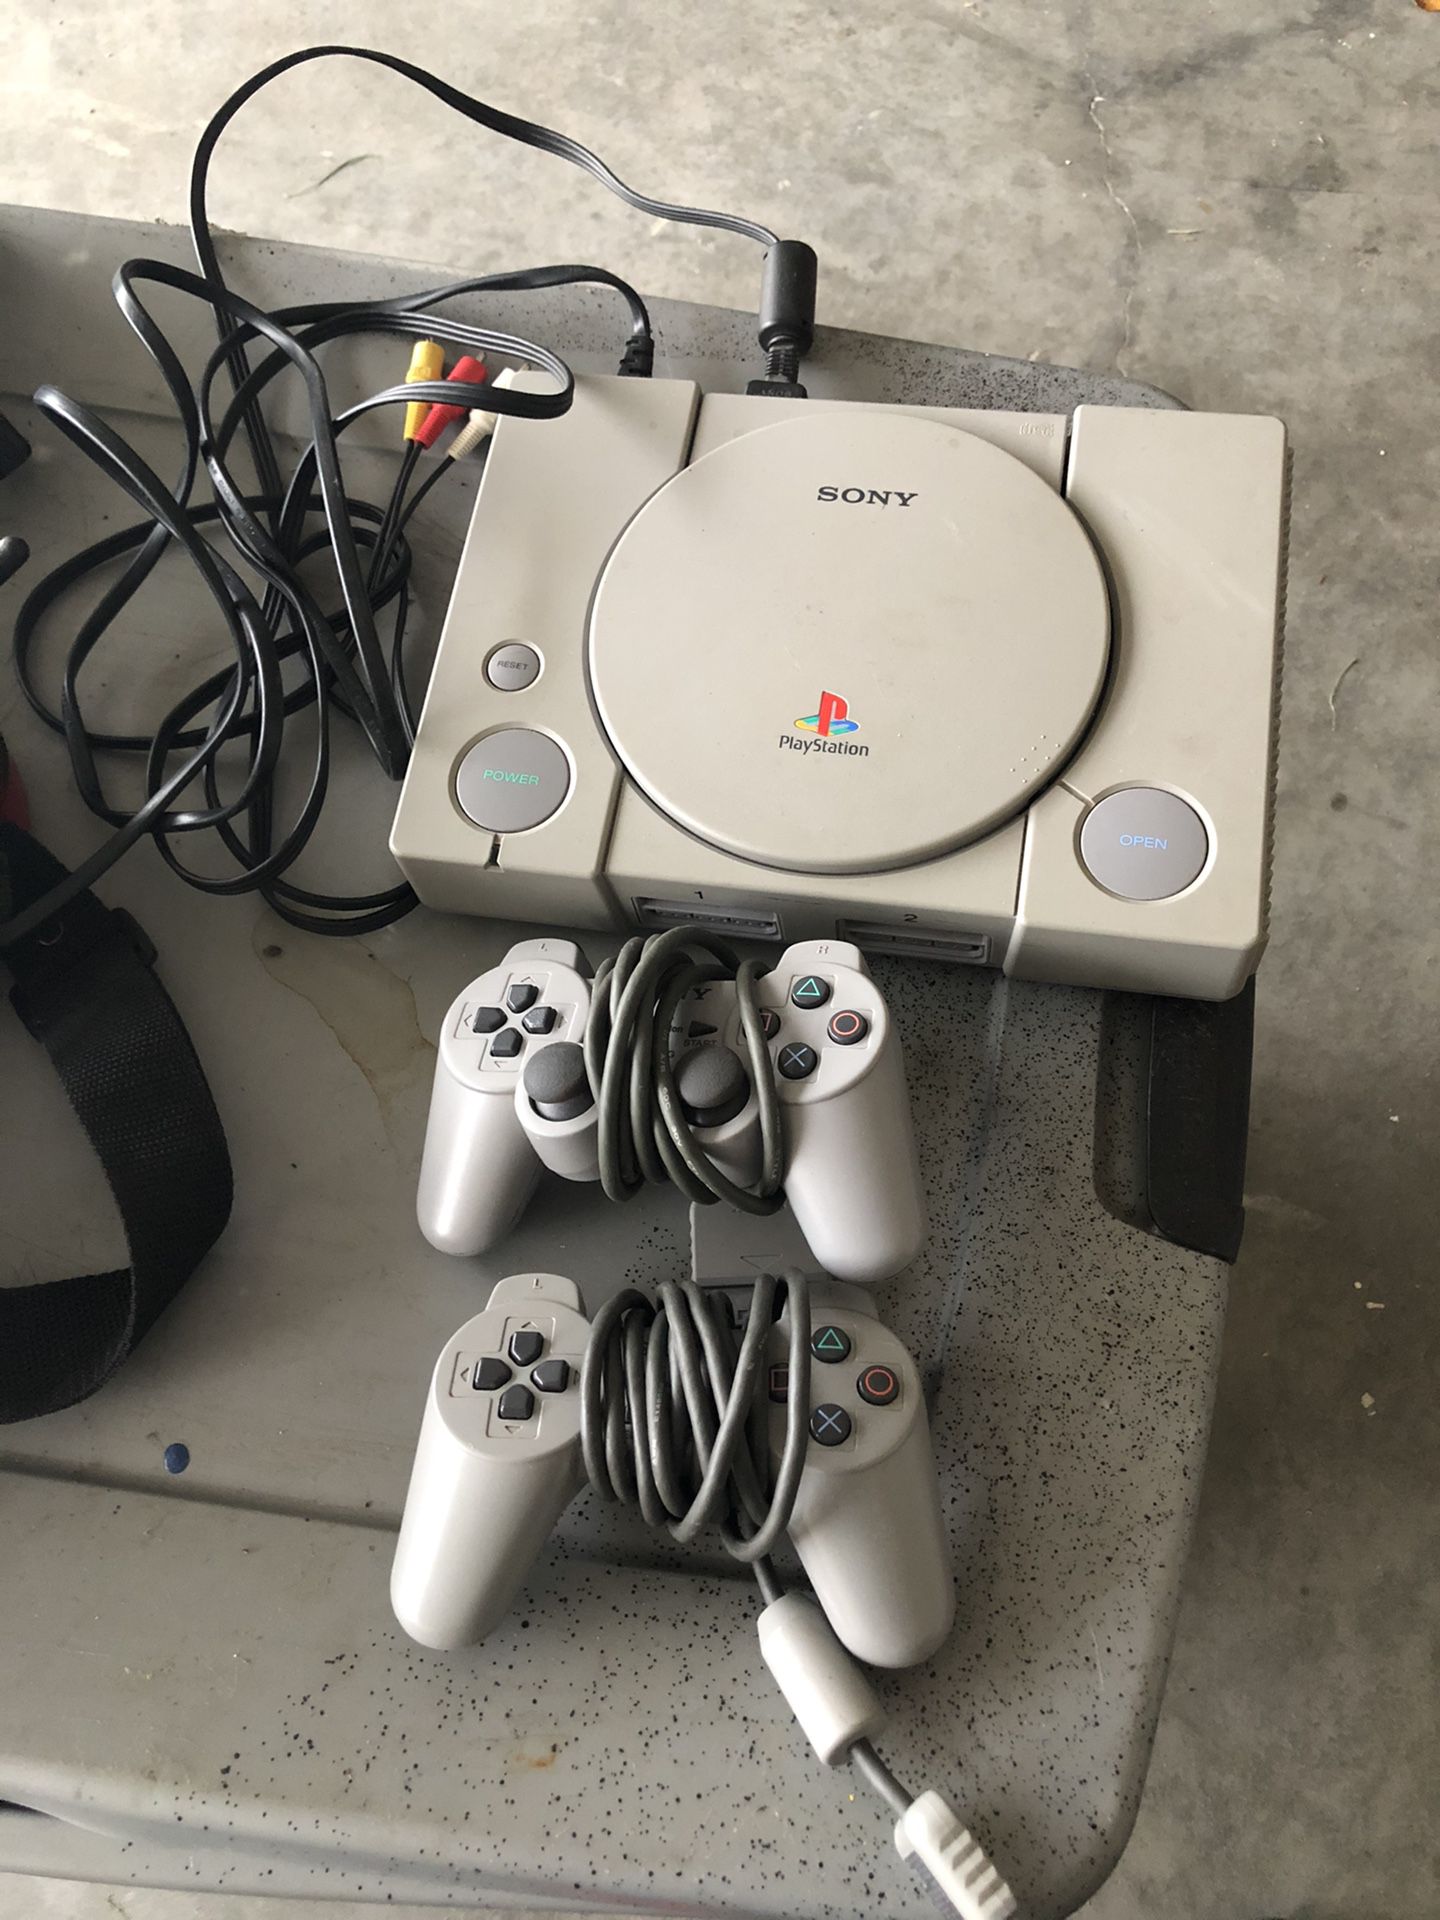 PlayStation (Original) with games and memory cards